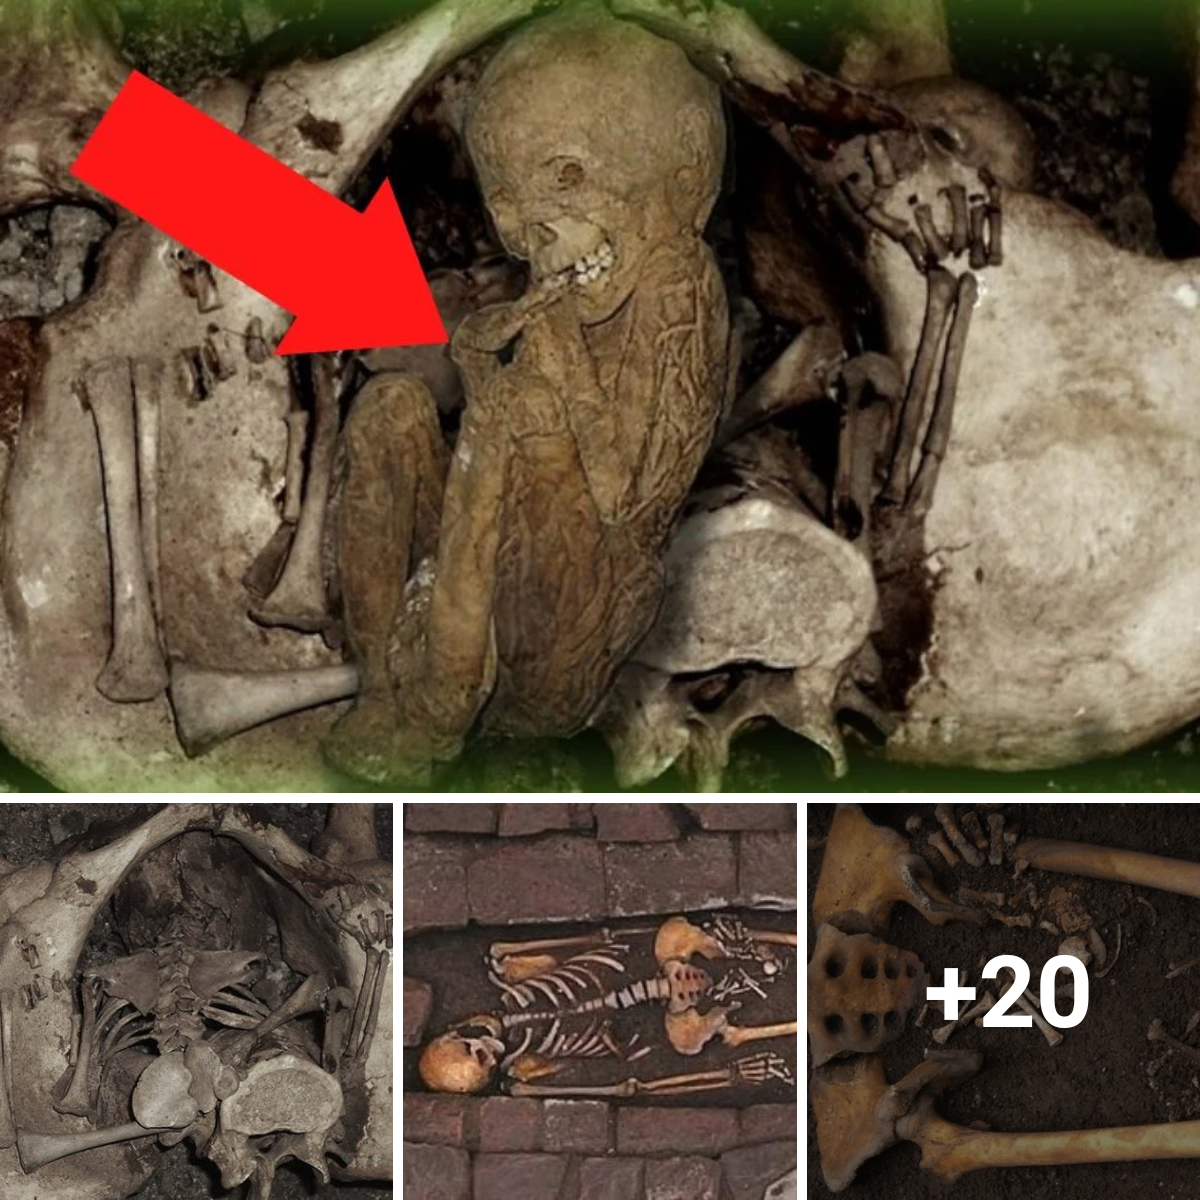 Unexpected addressing the enigma of the skeleton concealed within a 5 million-year-old mammoth carcass